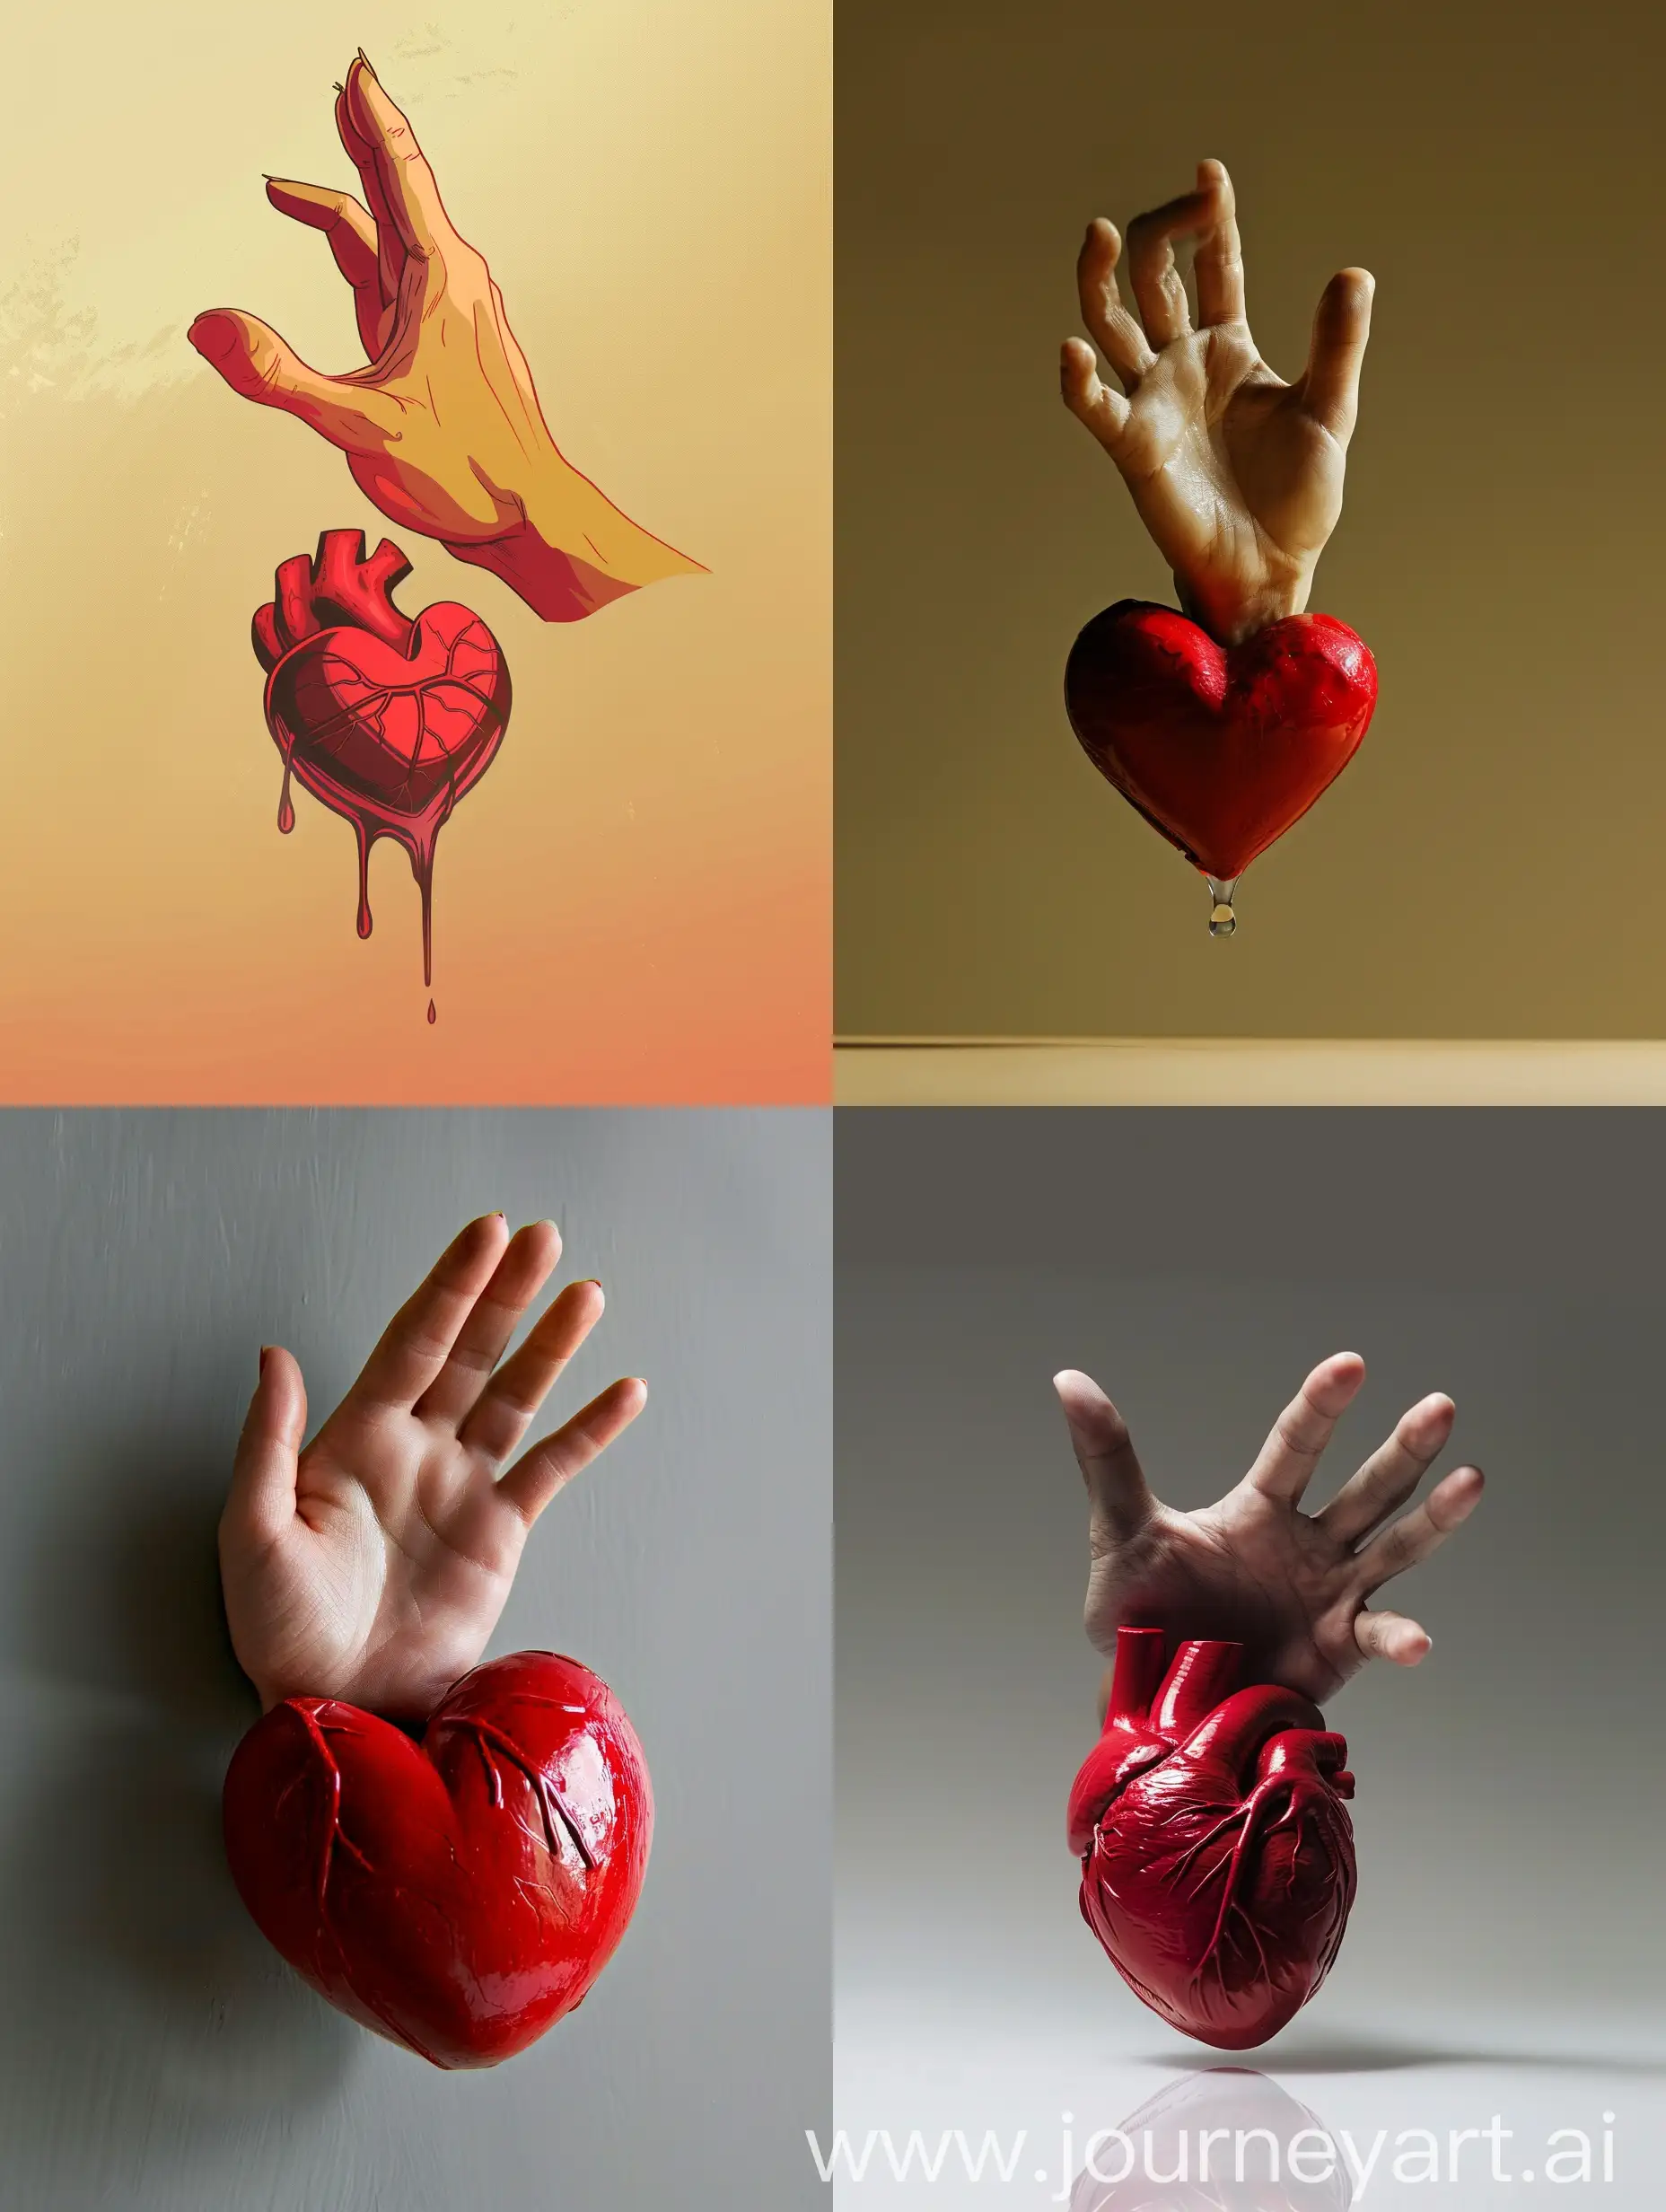 A hand coming out of a heart trying to reach out for love